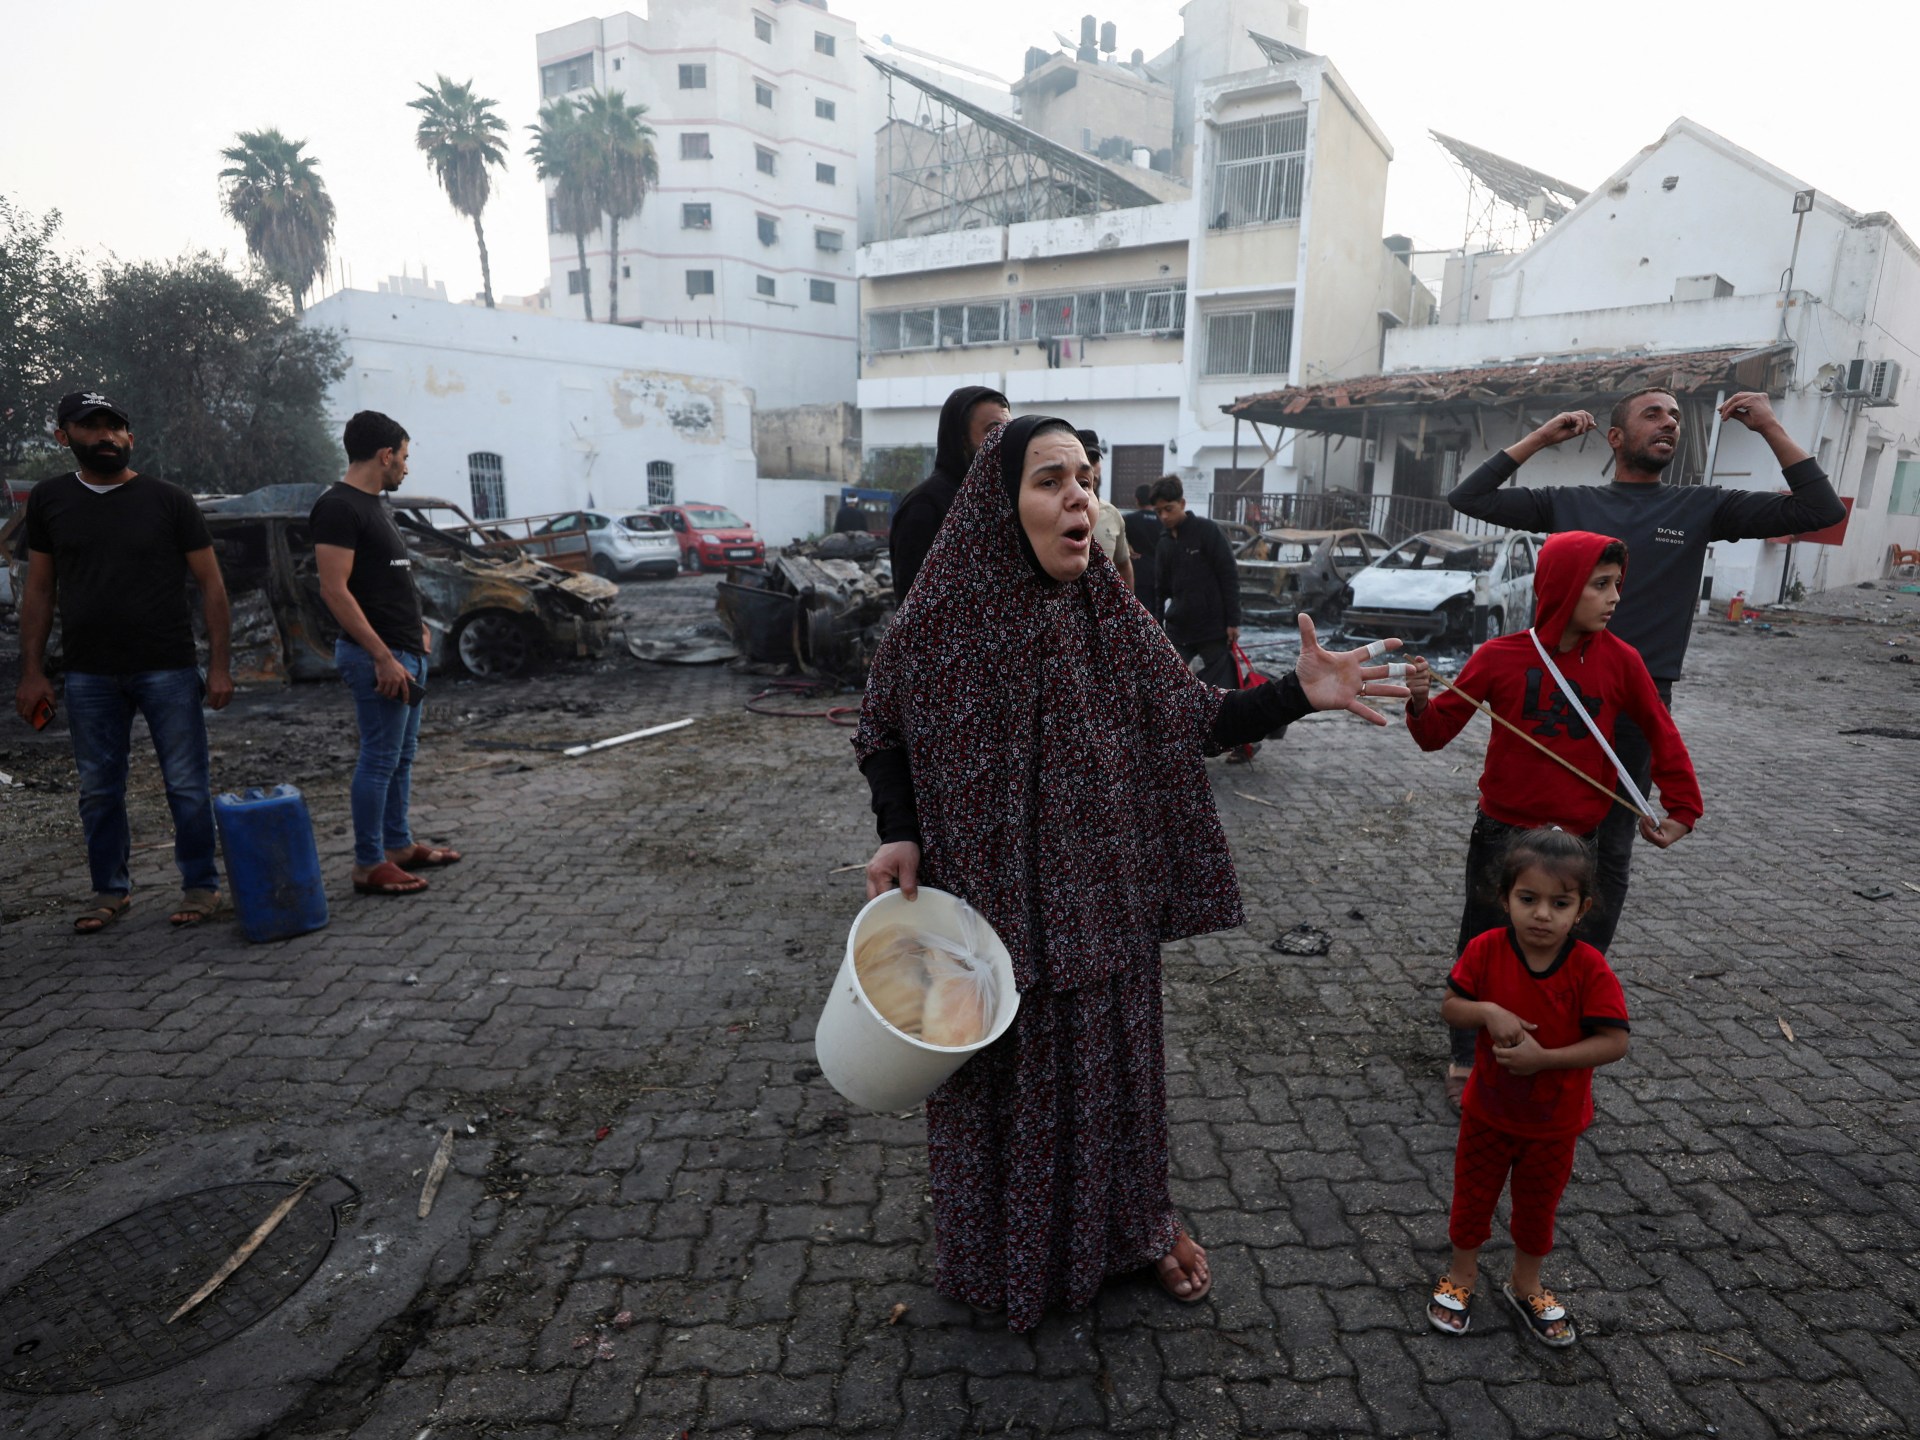 How has the narrative shifted since the Gaza hospital explosion?